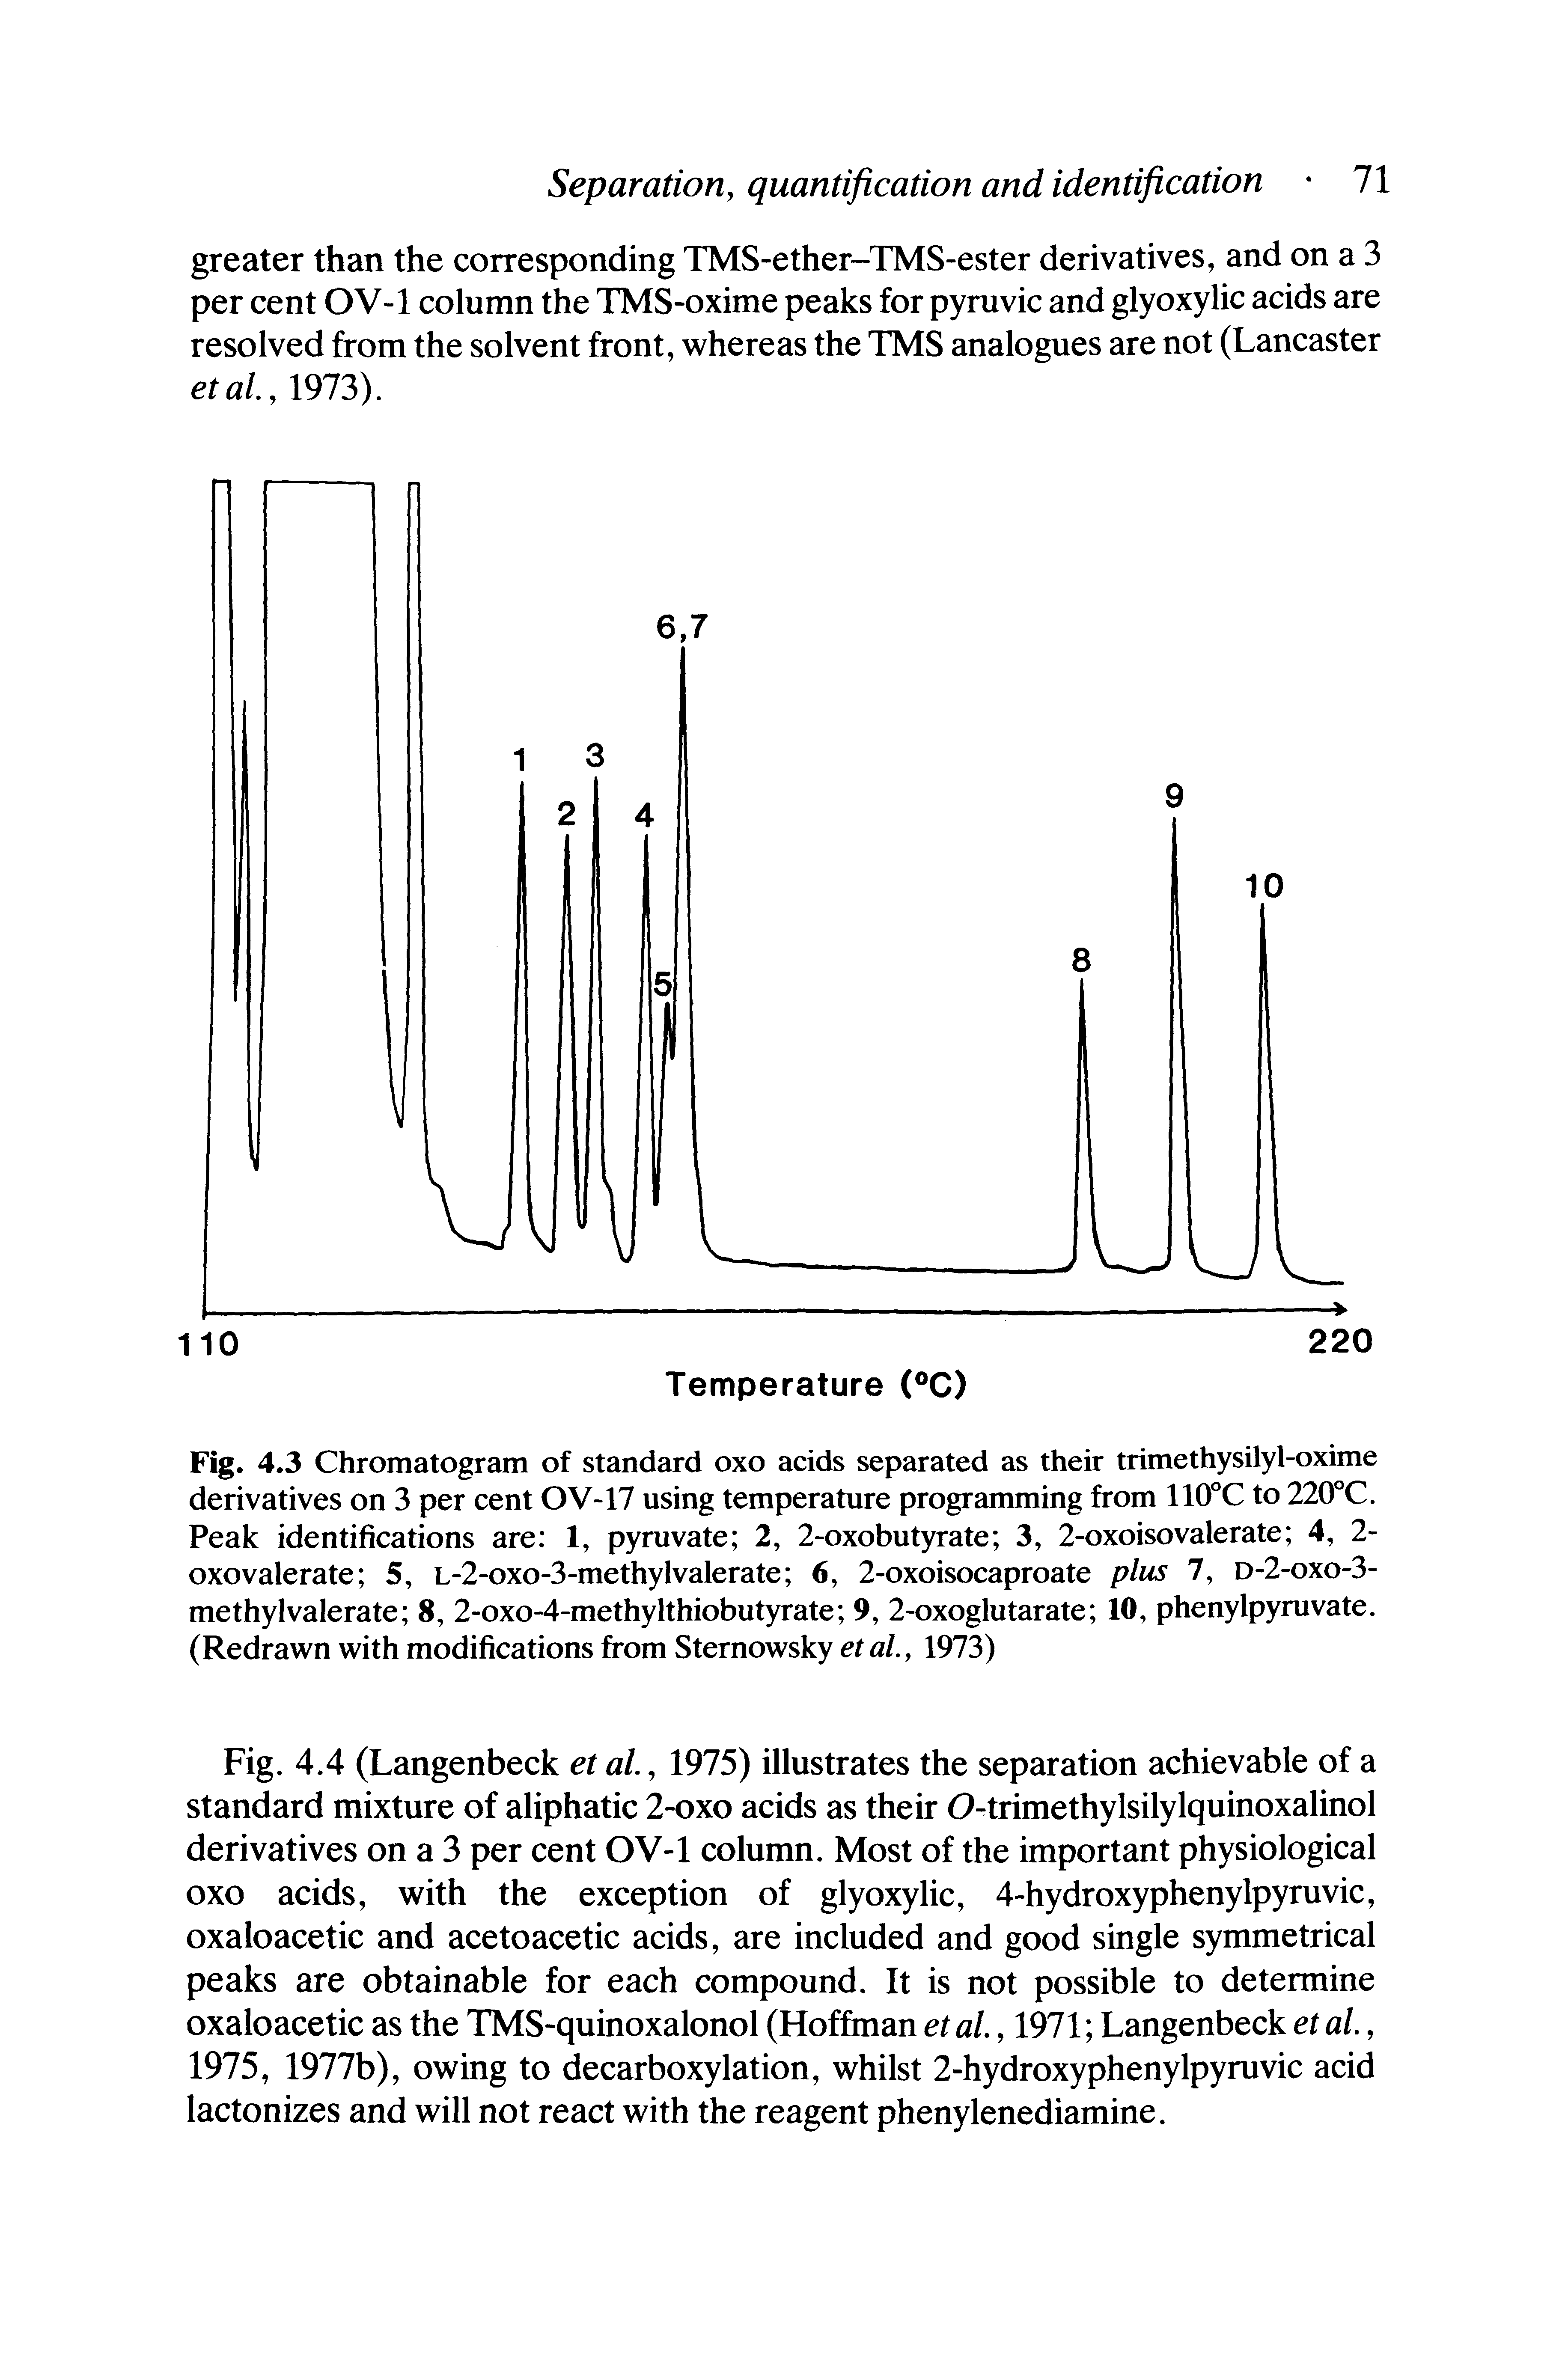 Fig. 4.3 Chromatogram of standard oxo acids separated as their trimethysilyl-oxime derivatives on 3 per cent OV-17 using temperature programming from 110°C to 220°C. Peak identifications are 1, pyruvate 2, 2-oxobutyrate 3, 2-oxoisovalerate 4, 2-0X0valerate 5, L-2-oxo-3-methylvalerate 6, 2-oxoisocaproate plus 7, d-2-oxo-3-methylvalerate 8, 2-oxo-4-methylthiobutyrate 9, 2-oxoglutarate 10, phenylpyruvate. (Redrawn with modifications from Sternowsky etal., 1973)...